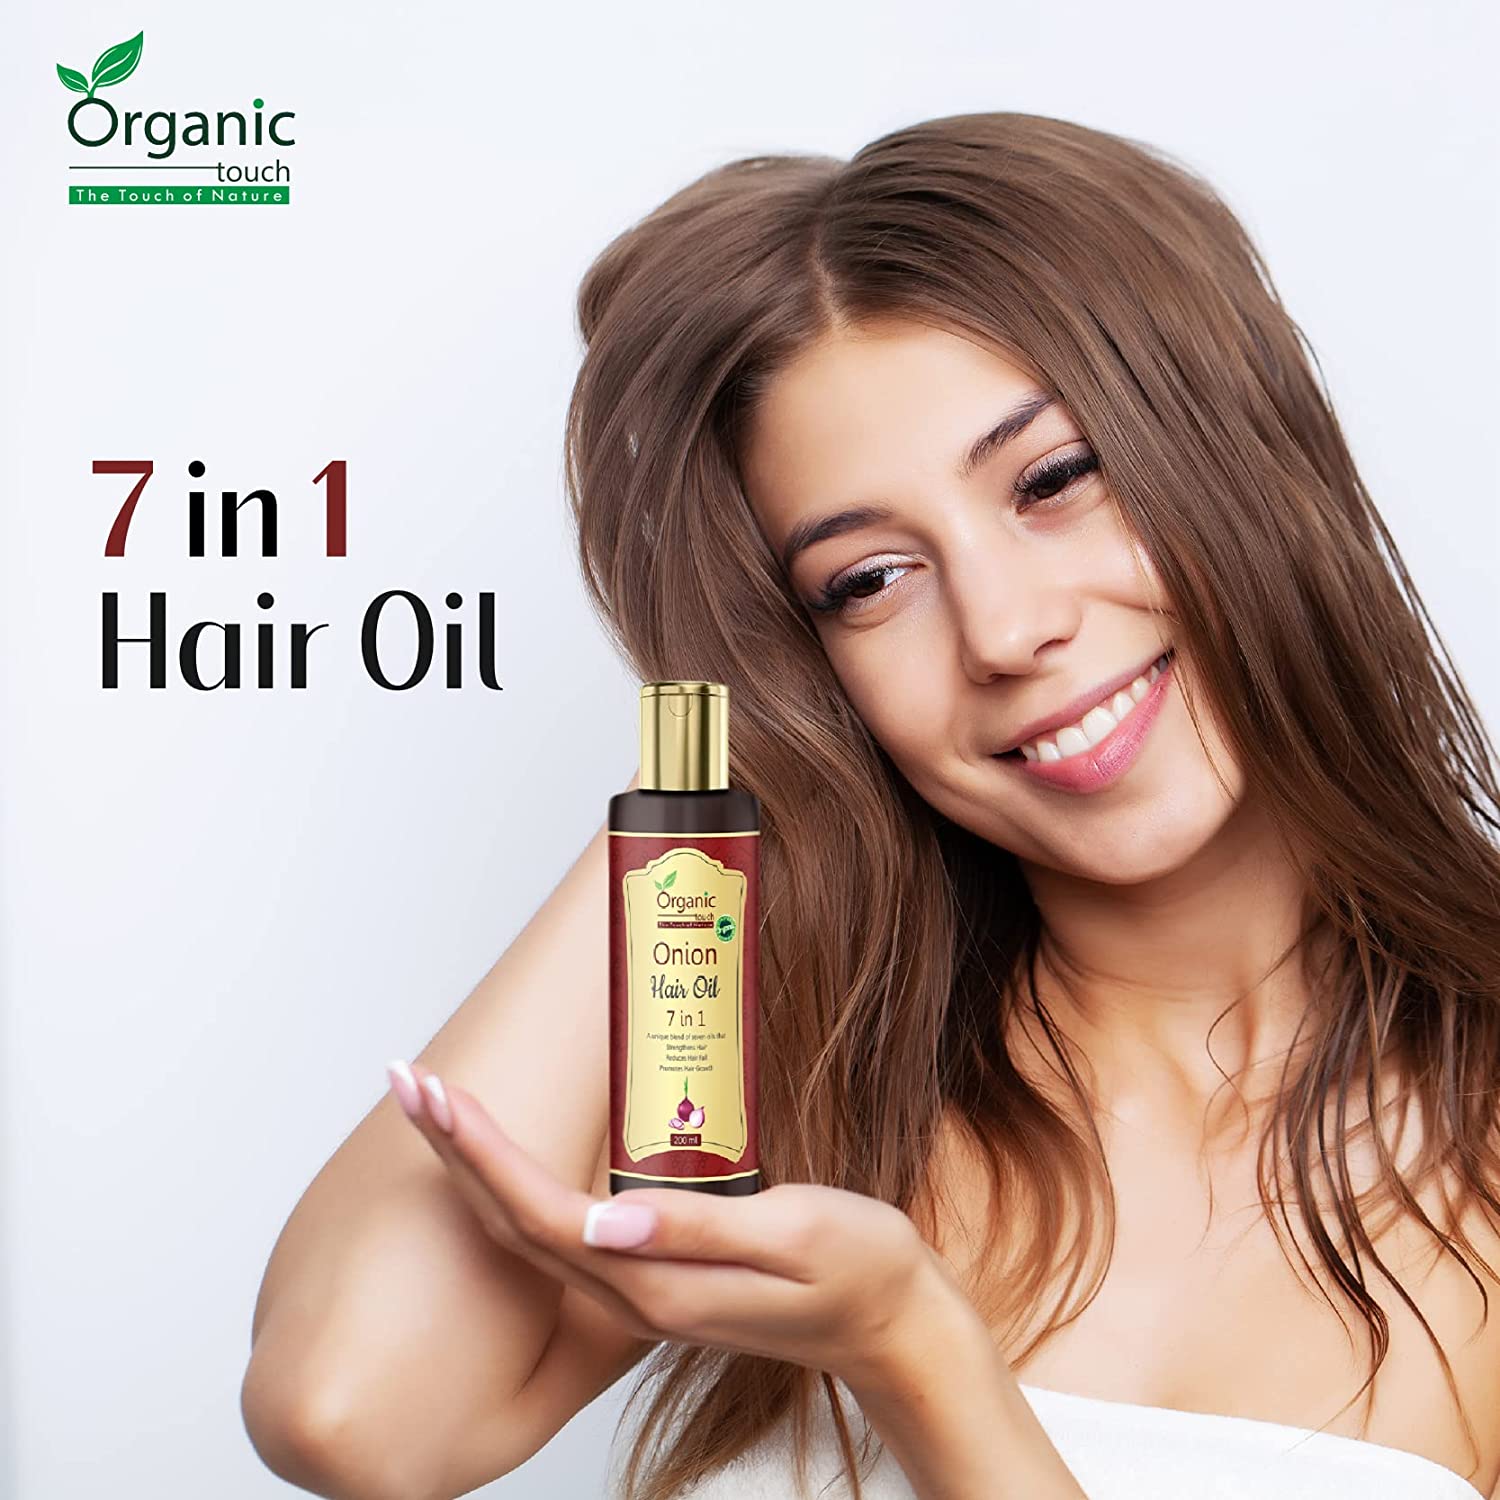 100 Pure Grapeseed Oil Antioxidantrich Oil For all Skin types 4 fl o   morgancosmeticsofficial